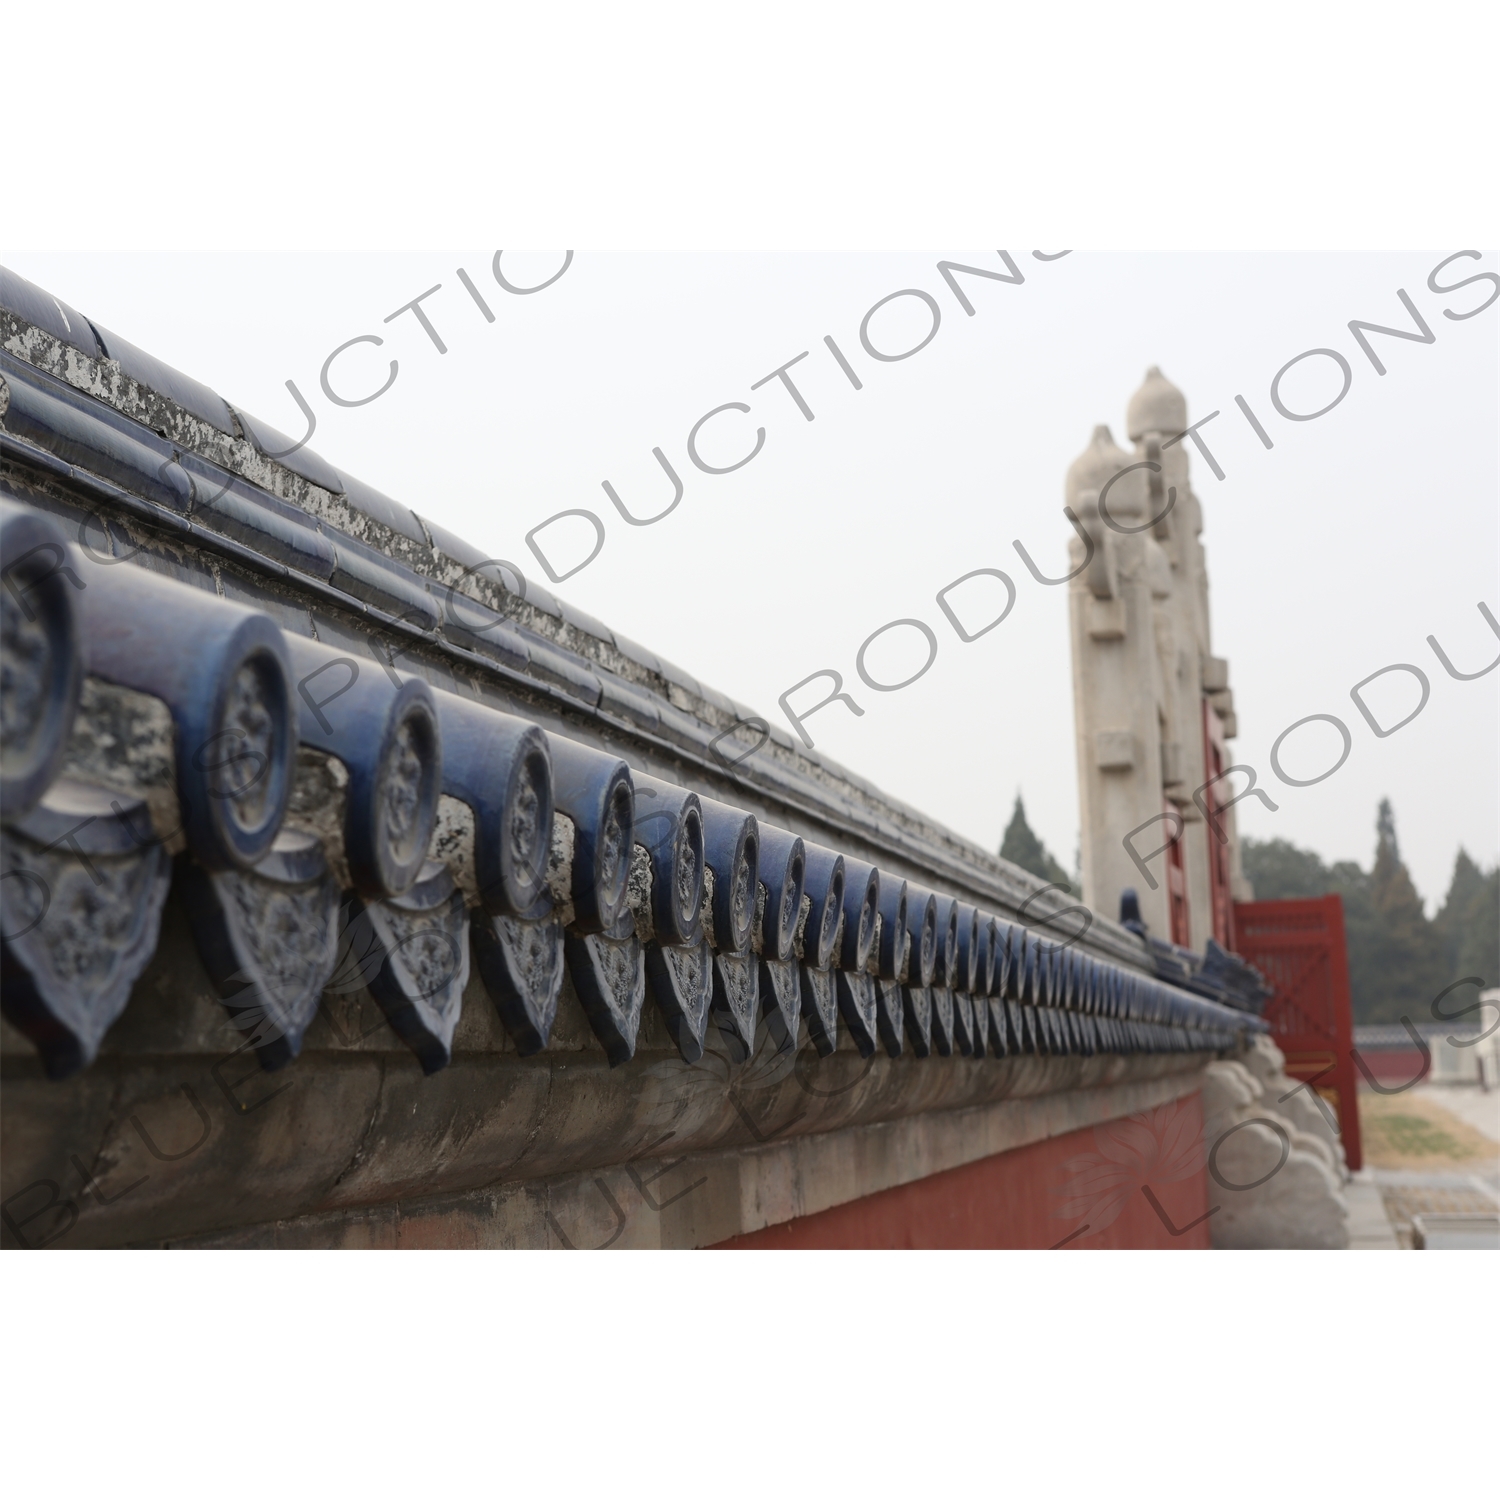 Glazed Wall Tiles in the Circular Mound Altar (Yuanqiu Tan) Compound in the Temple of Heaven (Tiantan) in Beijing